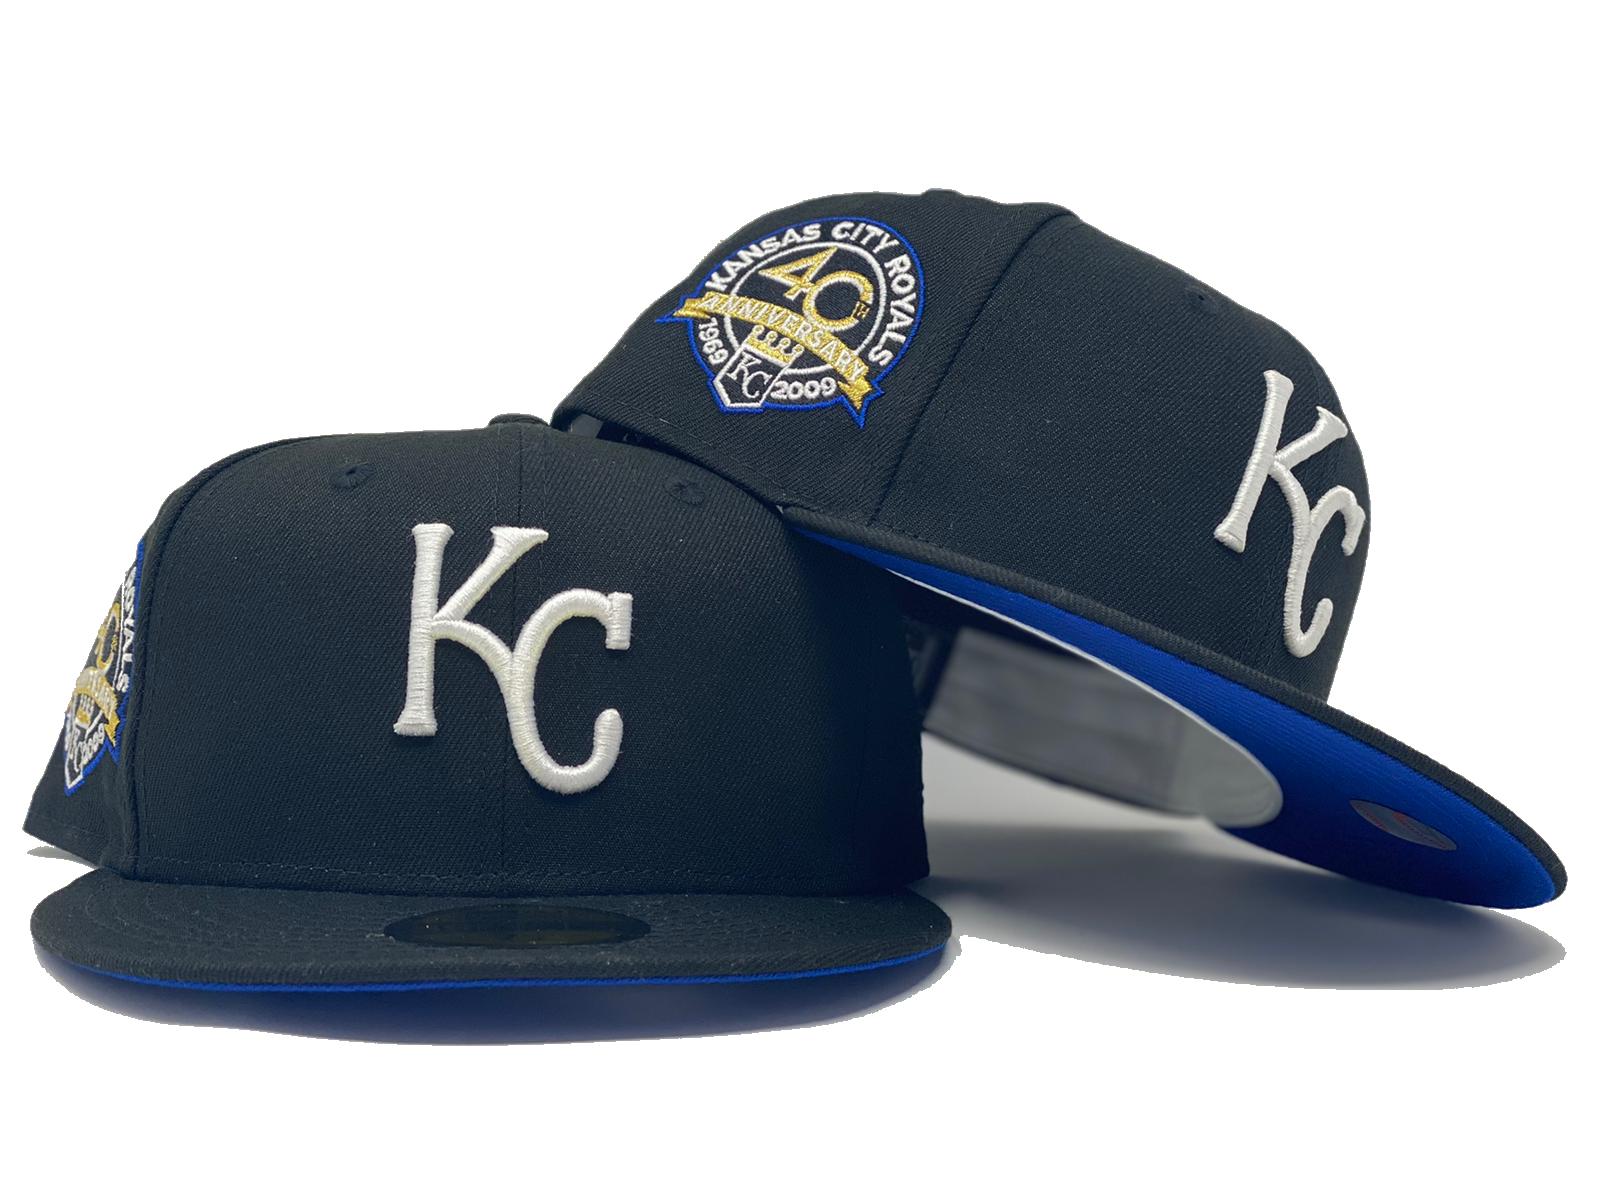 Men's Fanatics Branded Royal Kansas City Royals Iconic Team Patch Fitted Hat